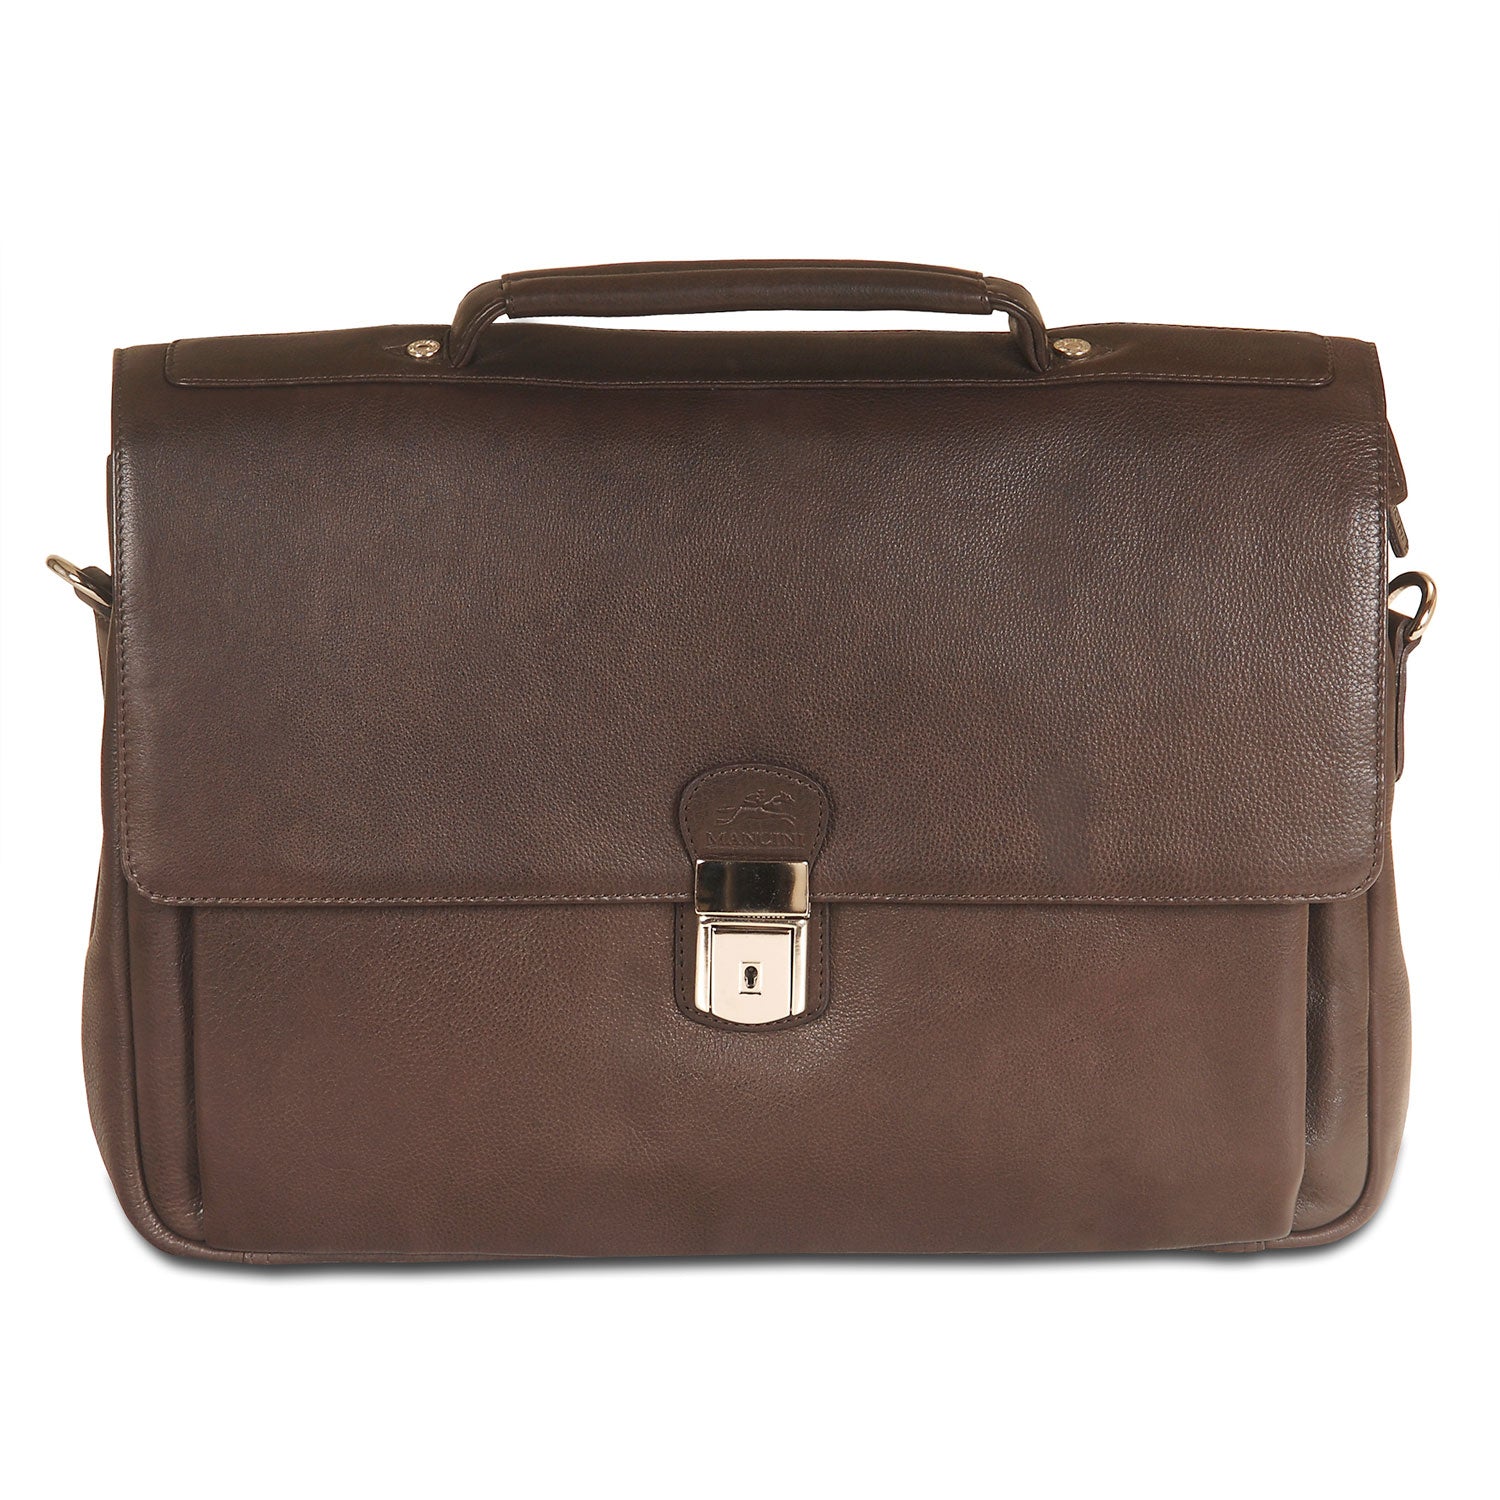 Mancini Leather Triple Compartment Flap Briefcase for 15" Laptop / Tablet, 15" x 4.25" x 10.25", Brown